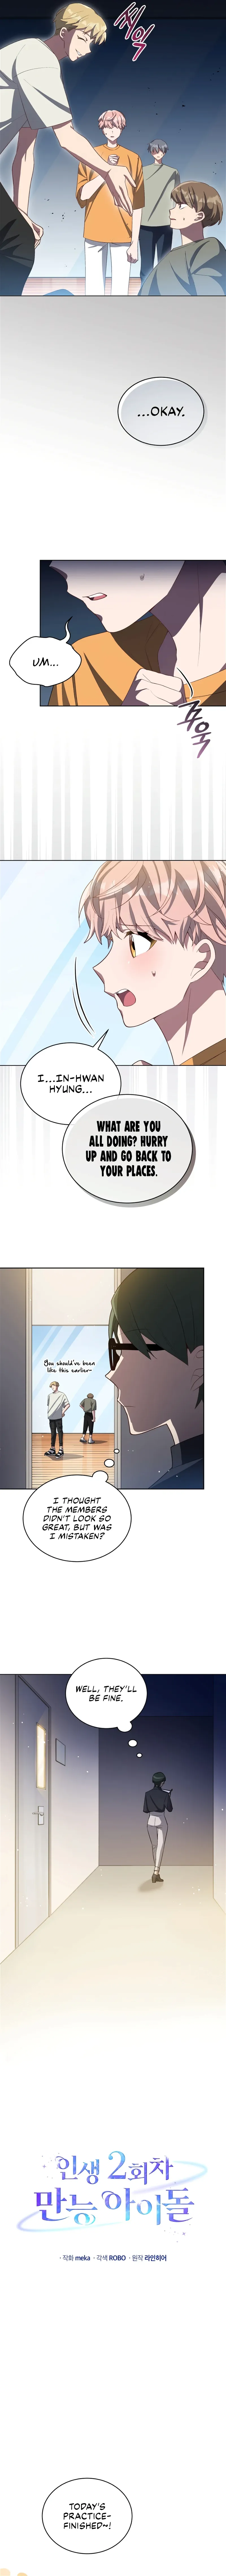 The Second Life of an All-Rounder Idol Chapter 8 page 3